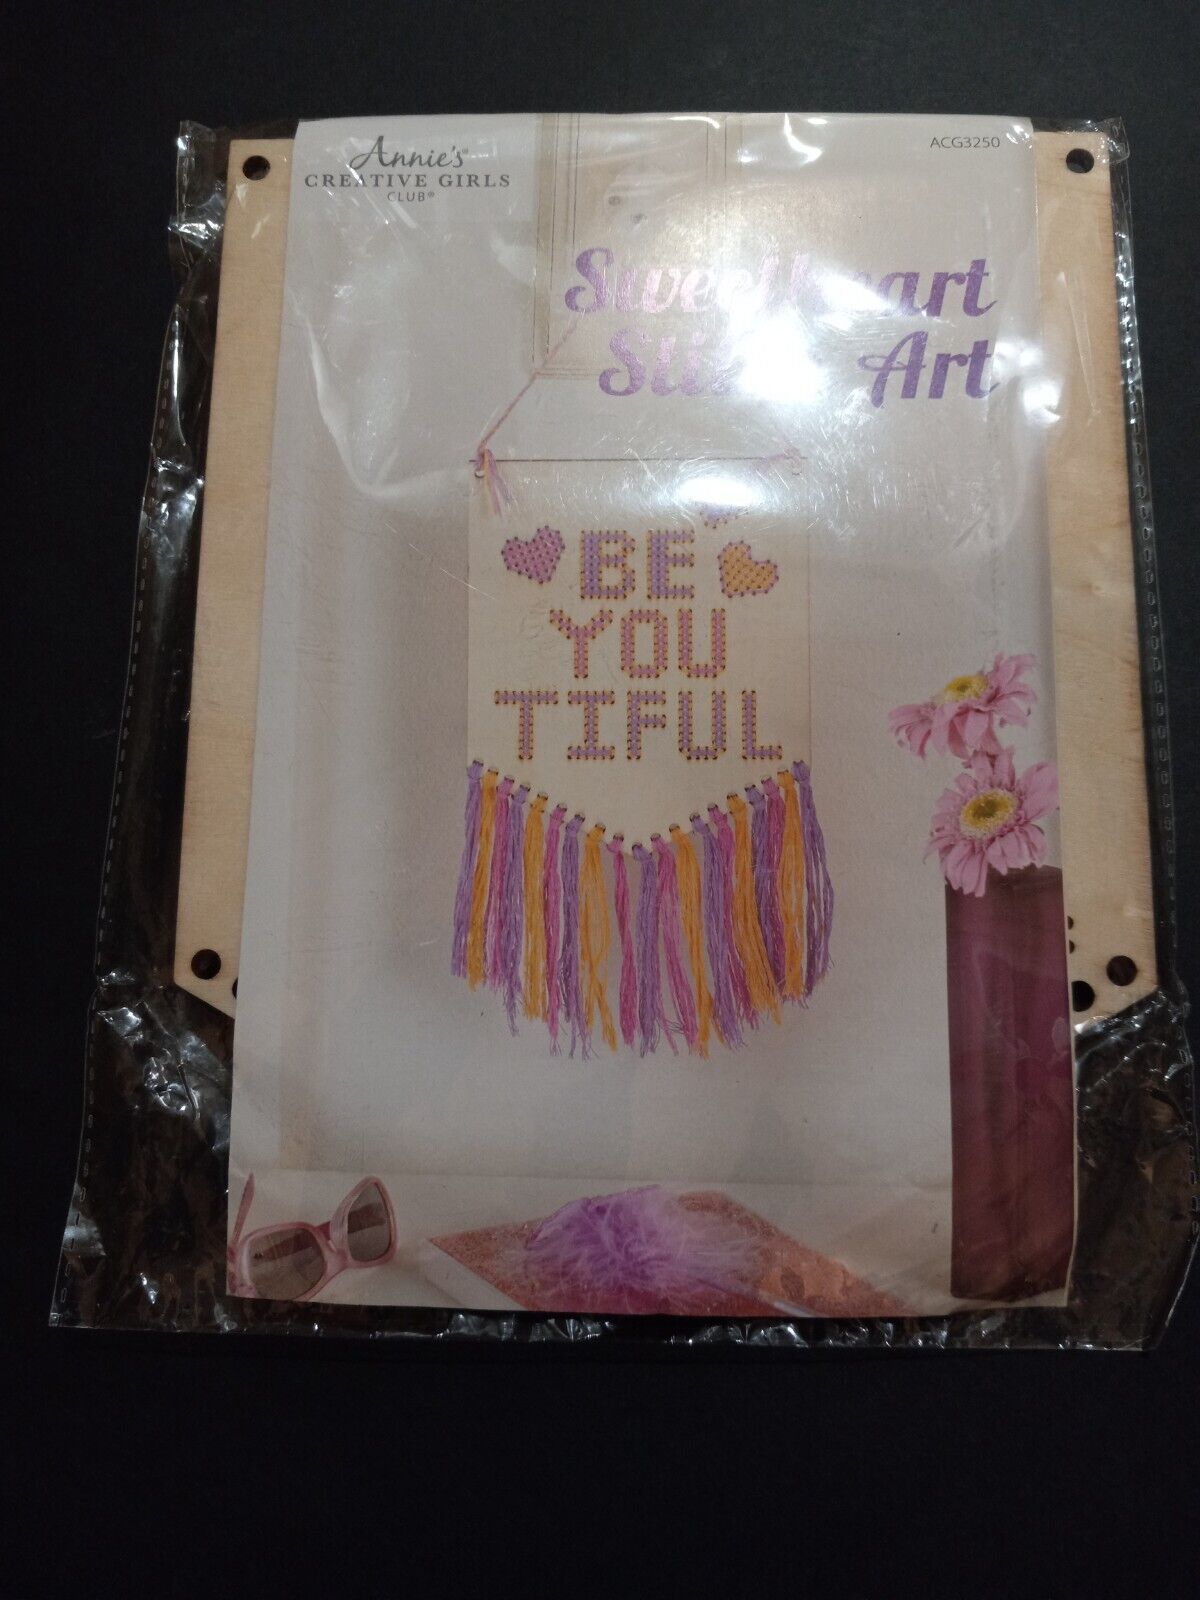 New Annies Creative Girls Cross Stitch Kit Be You tiful - $7.99